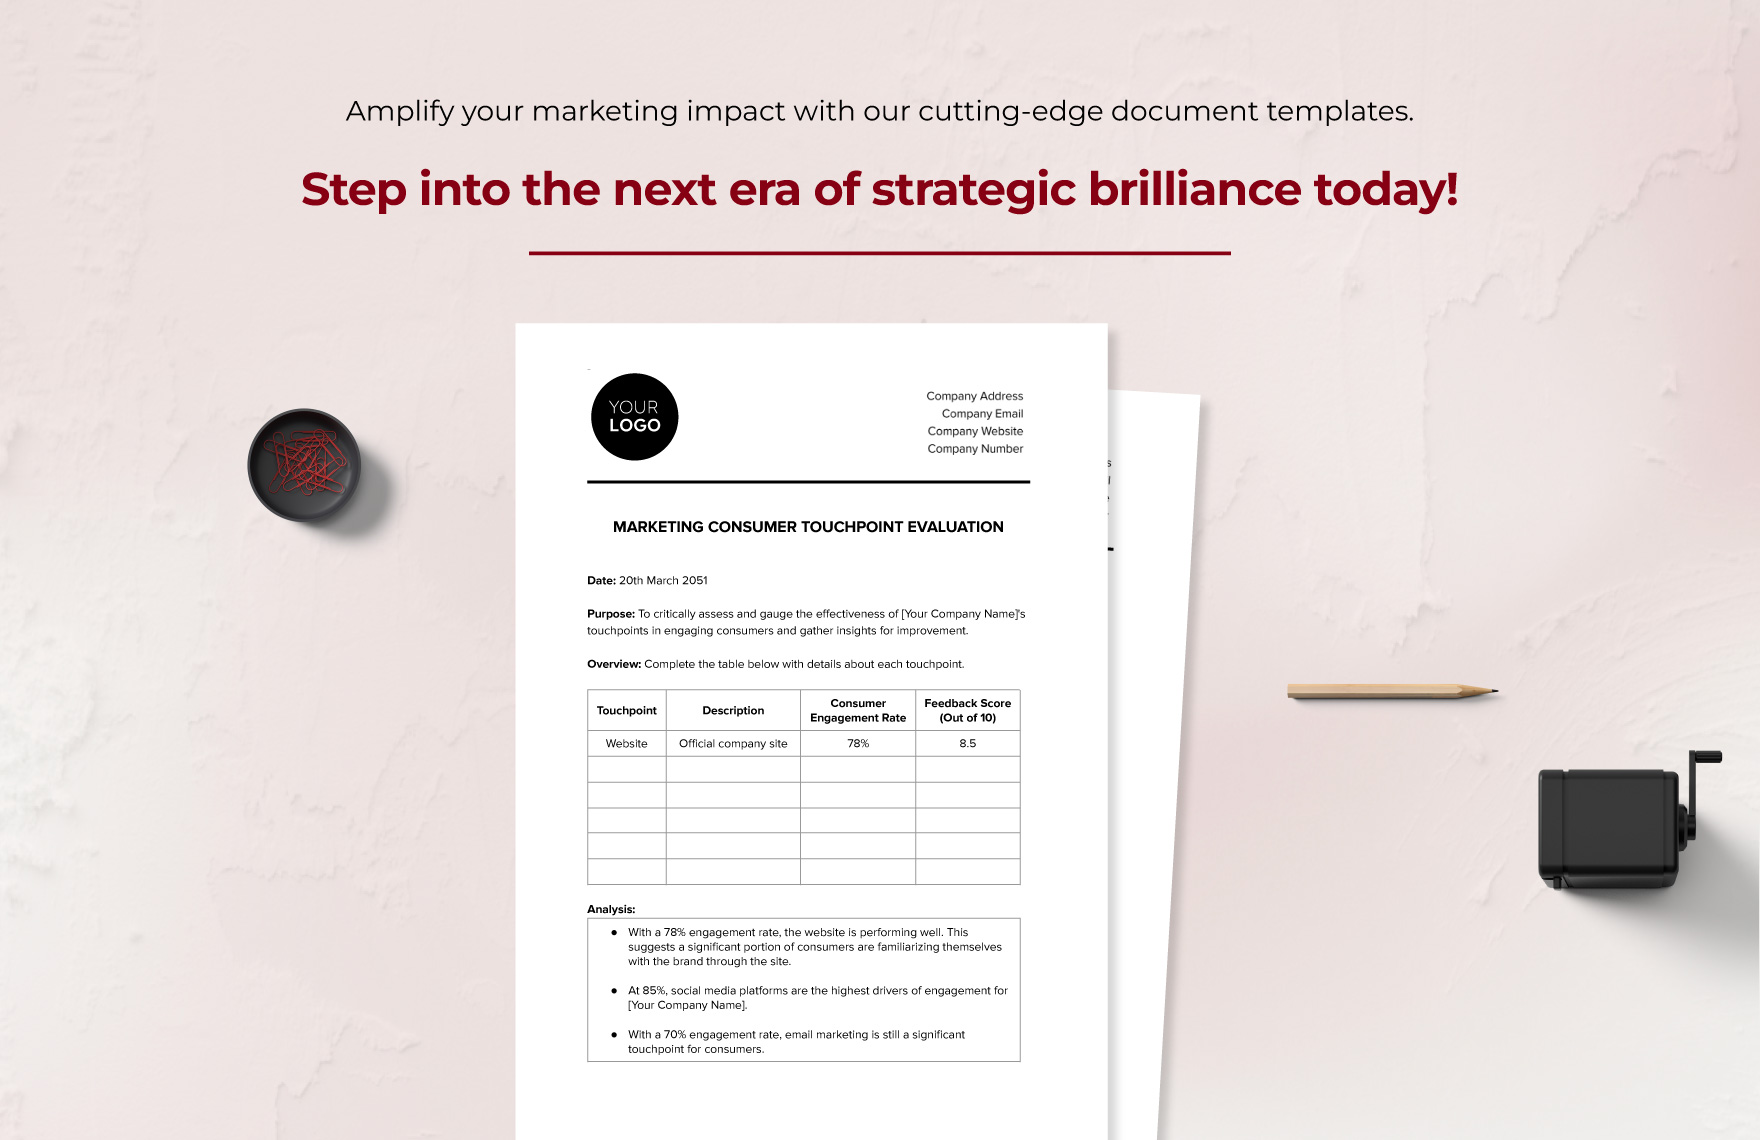 Marketing Consumer Touchpoint Evaluation Template